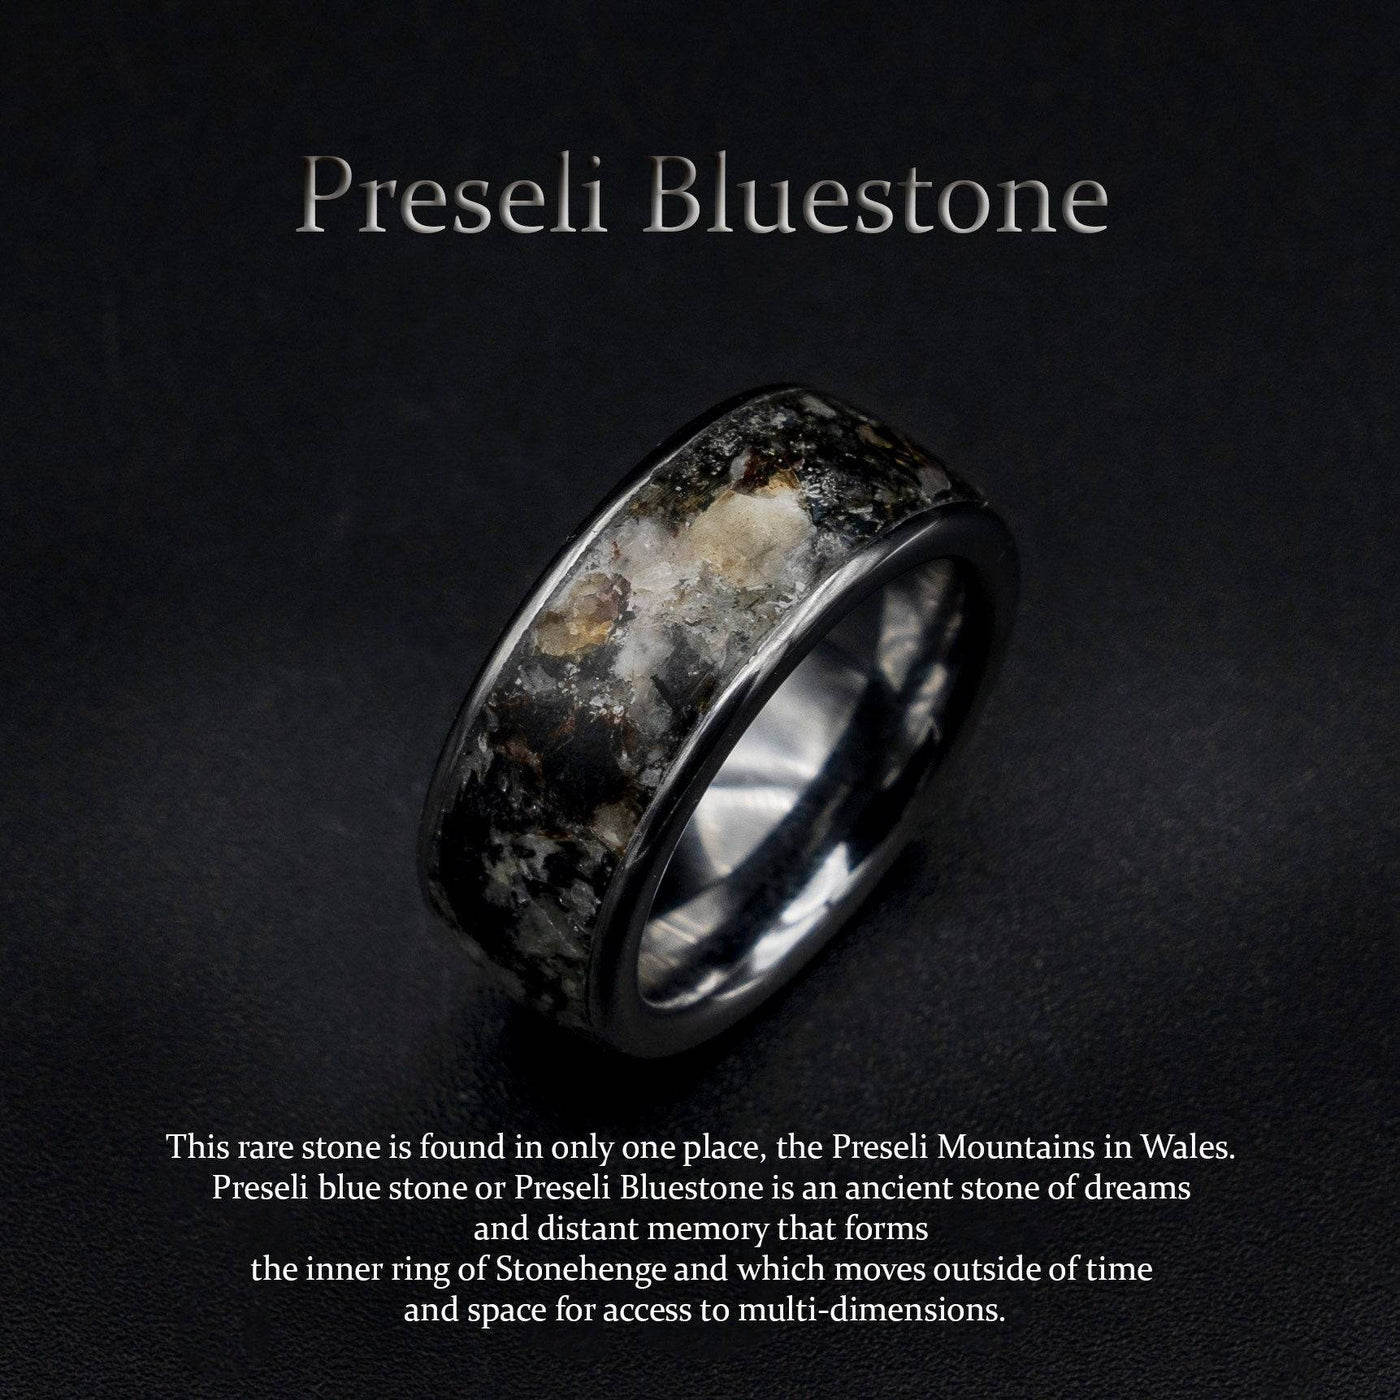 The Firm and Swanky Ring | BlueStone.com